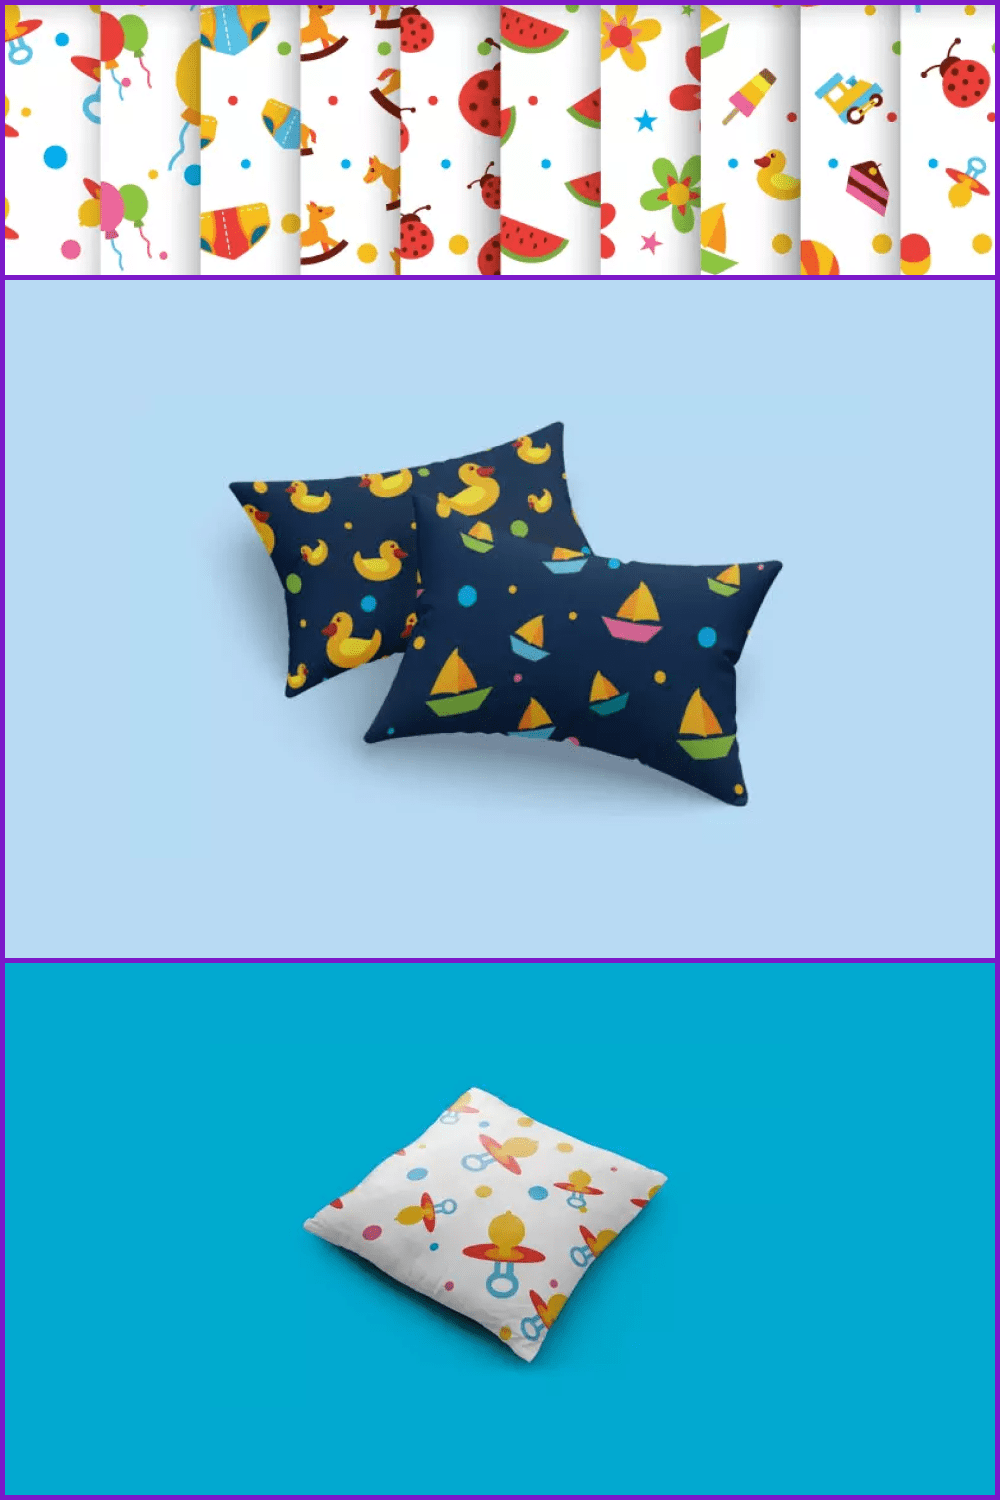 Pillows with baby patterns.